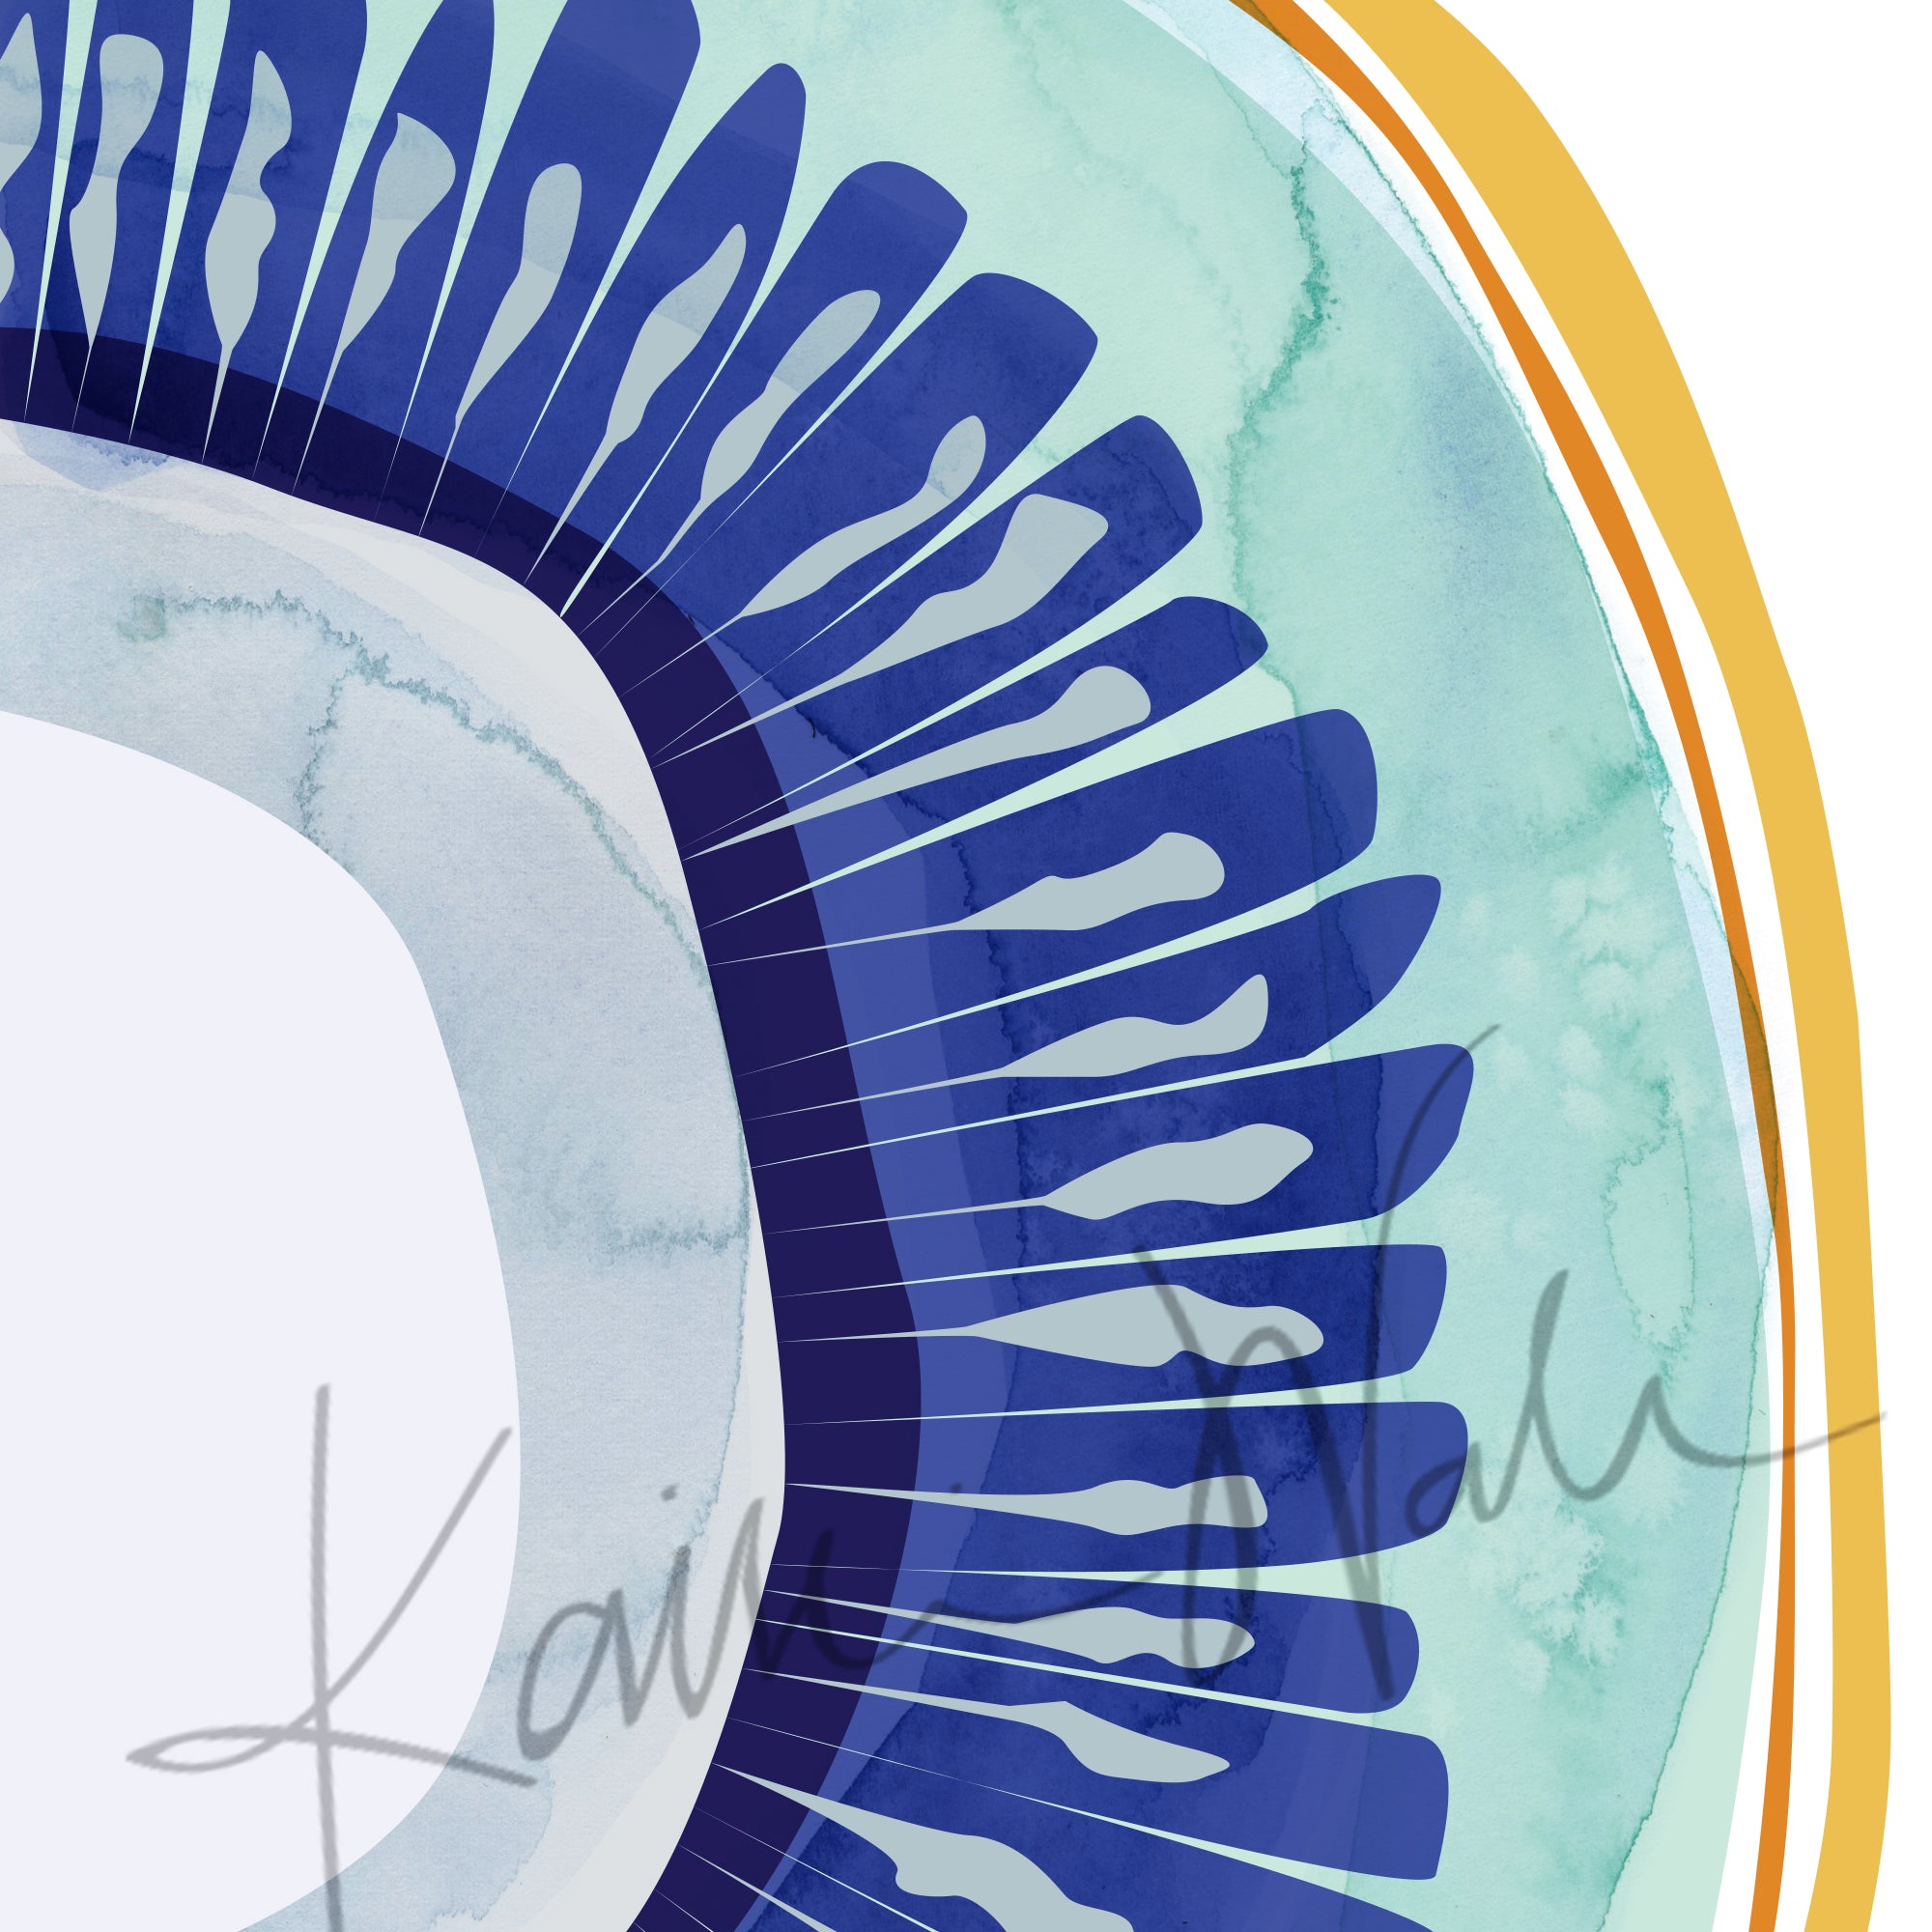 Zoomed in view of a contemporary poster design of the ciliary body in teal, royal blue, orange, and yellow.